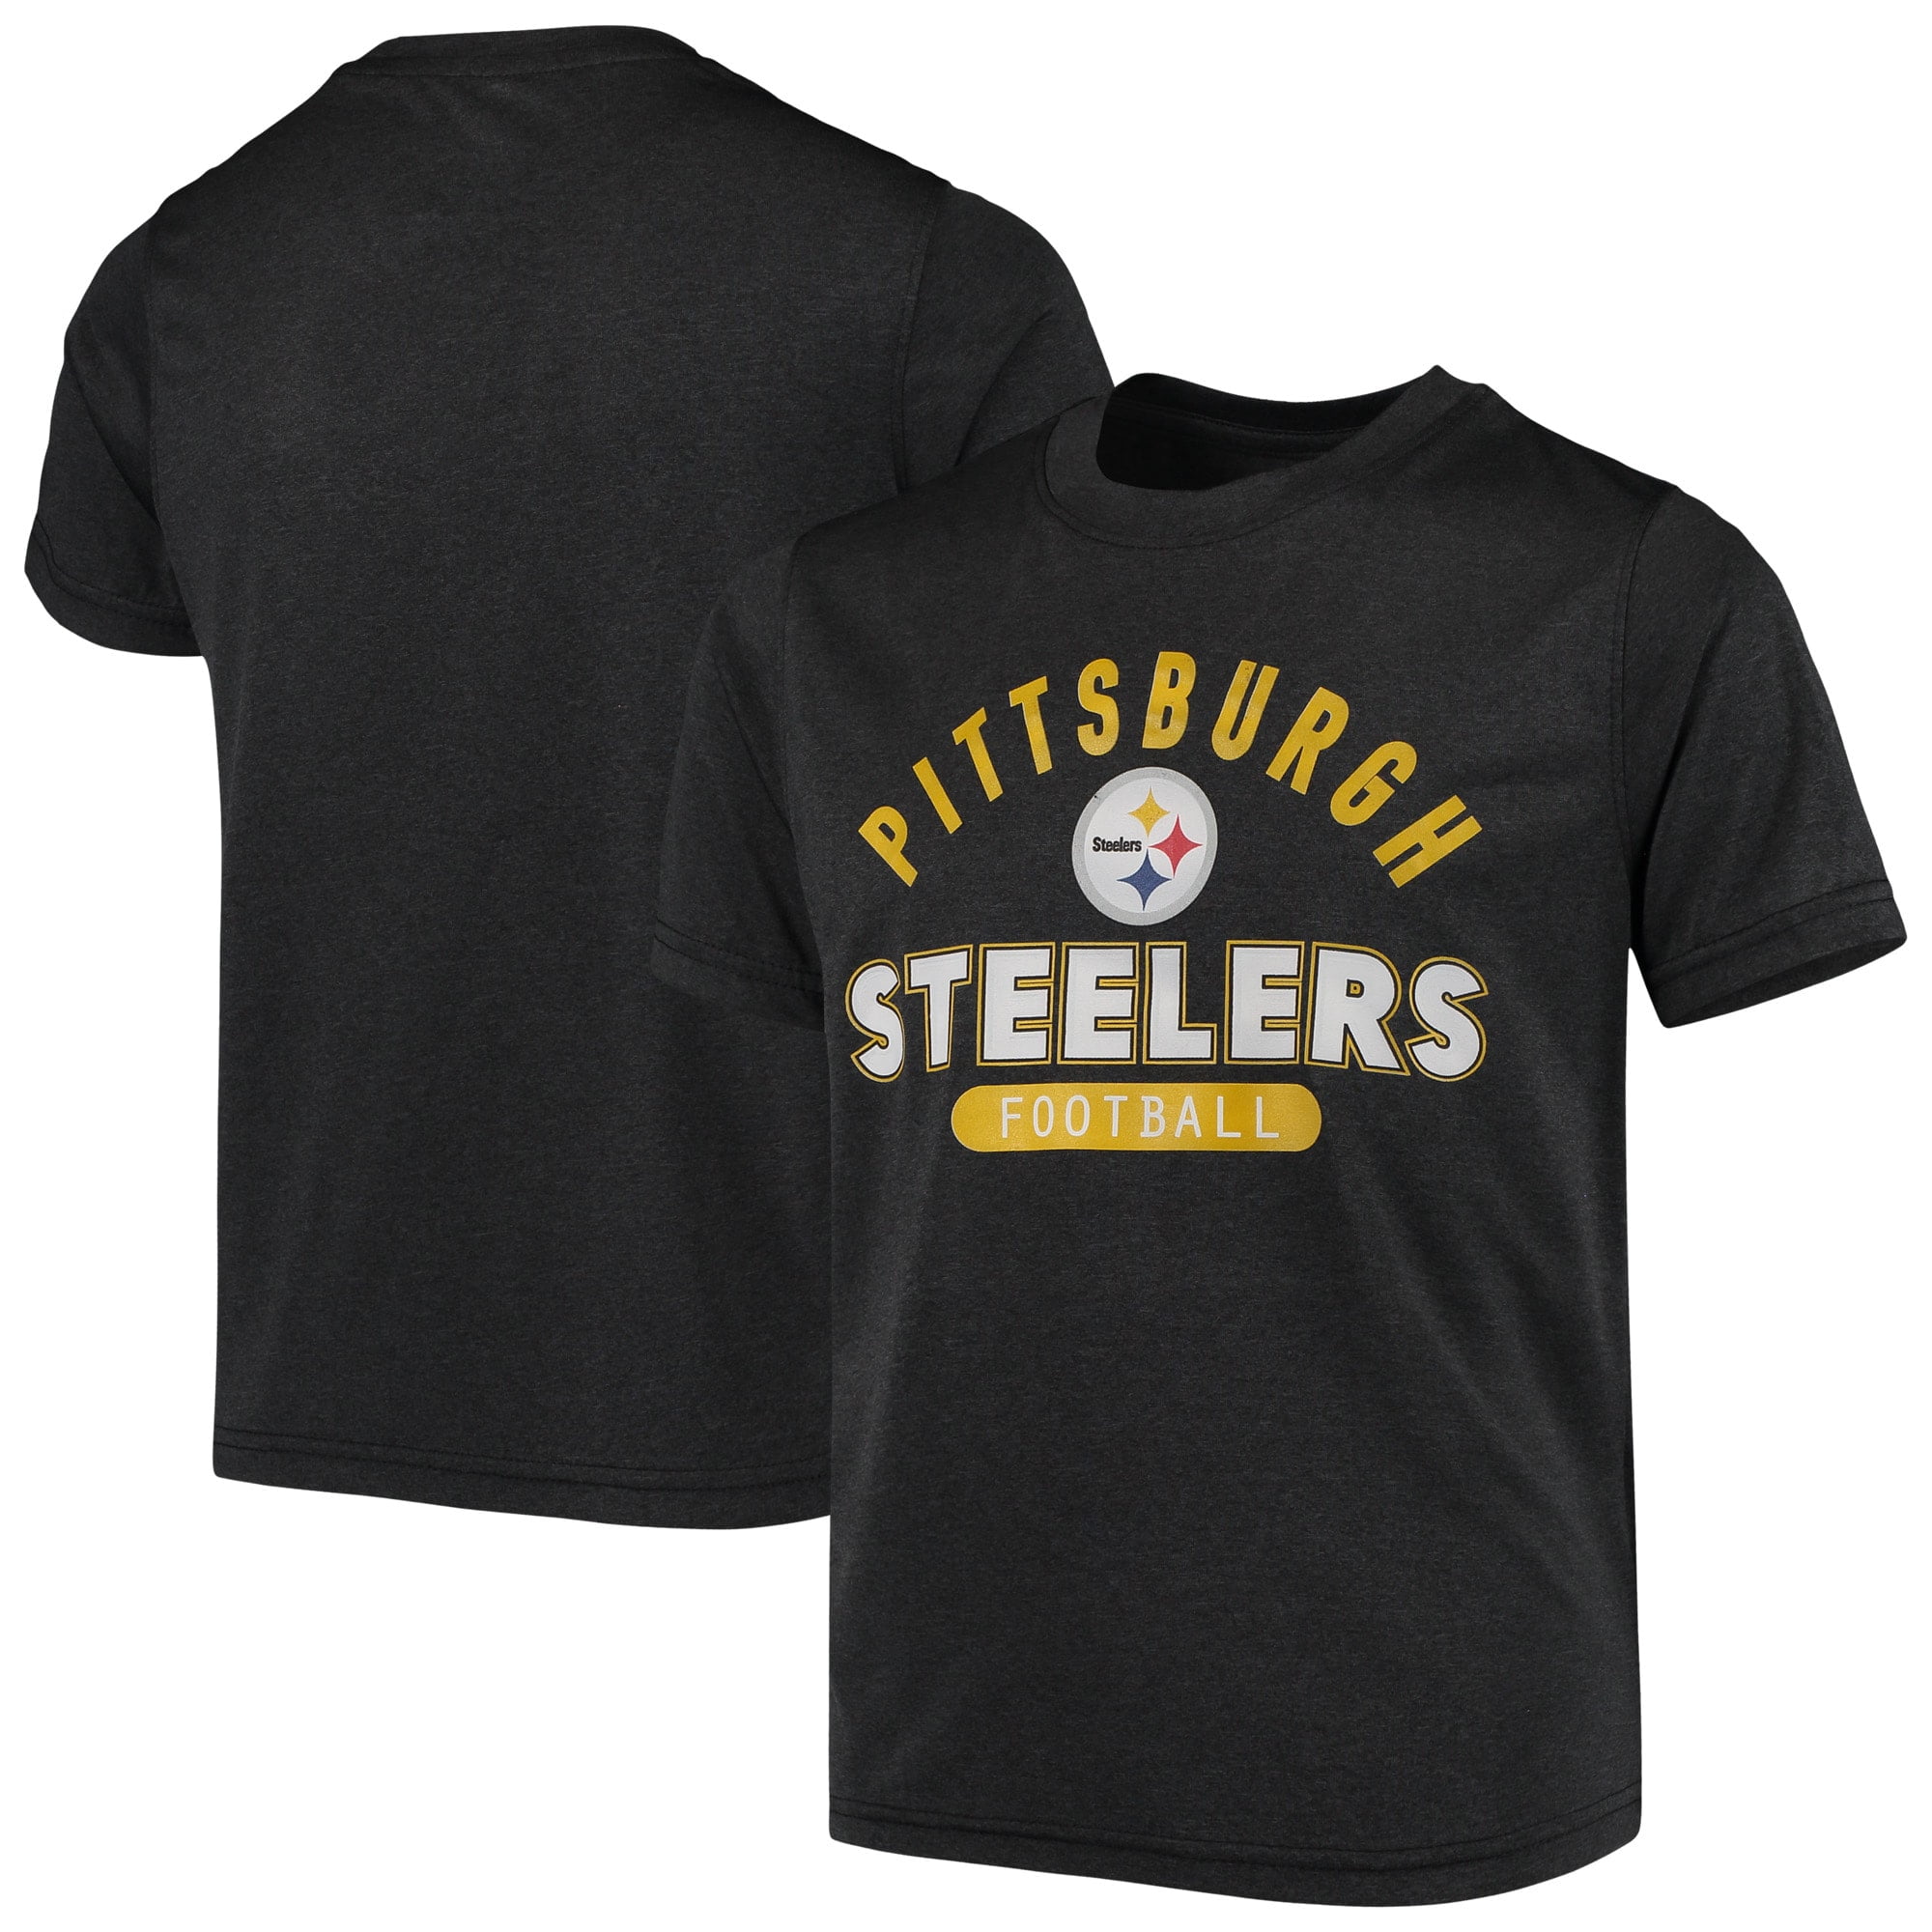 youth steelers shirt